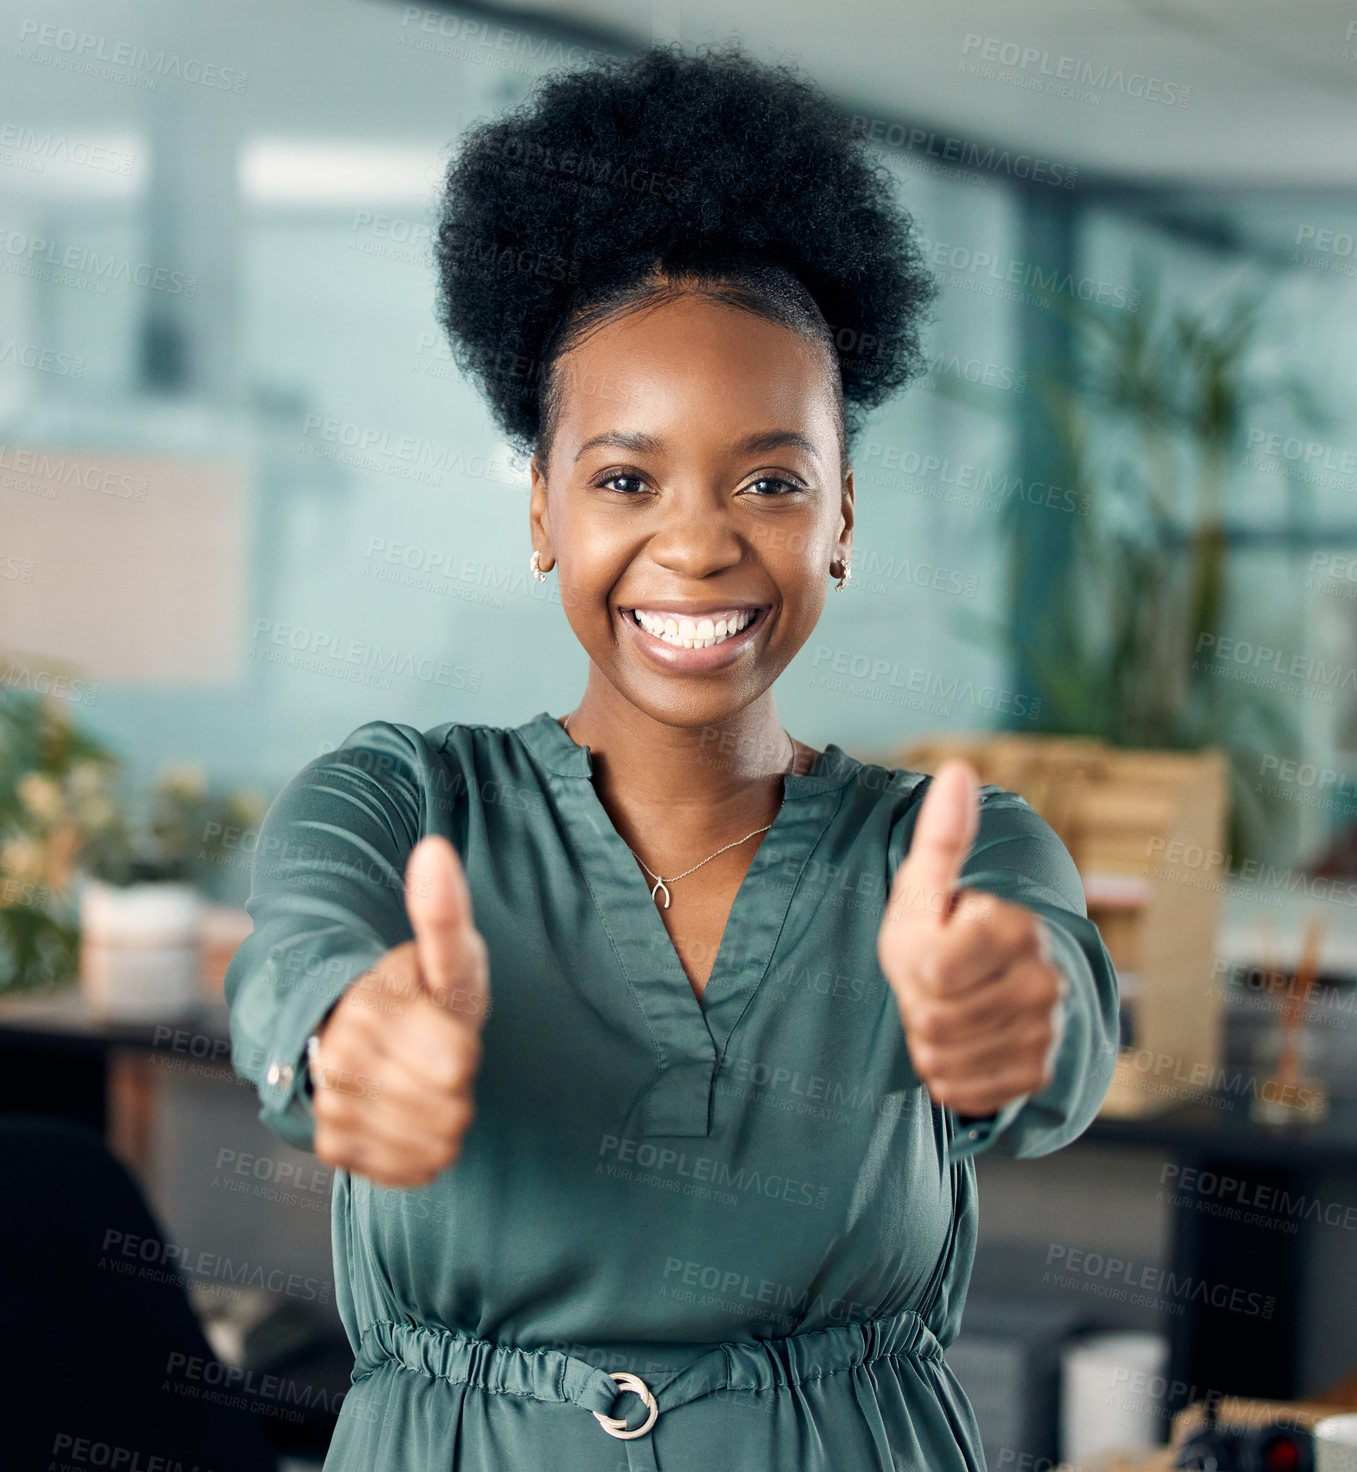 Buy stock photo Portrait of a young businesswoman showing thumbs up in an office